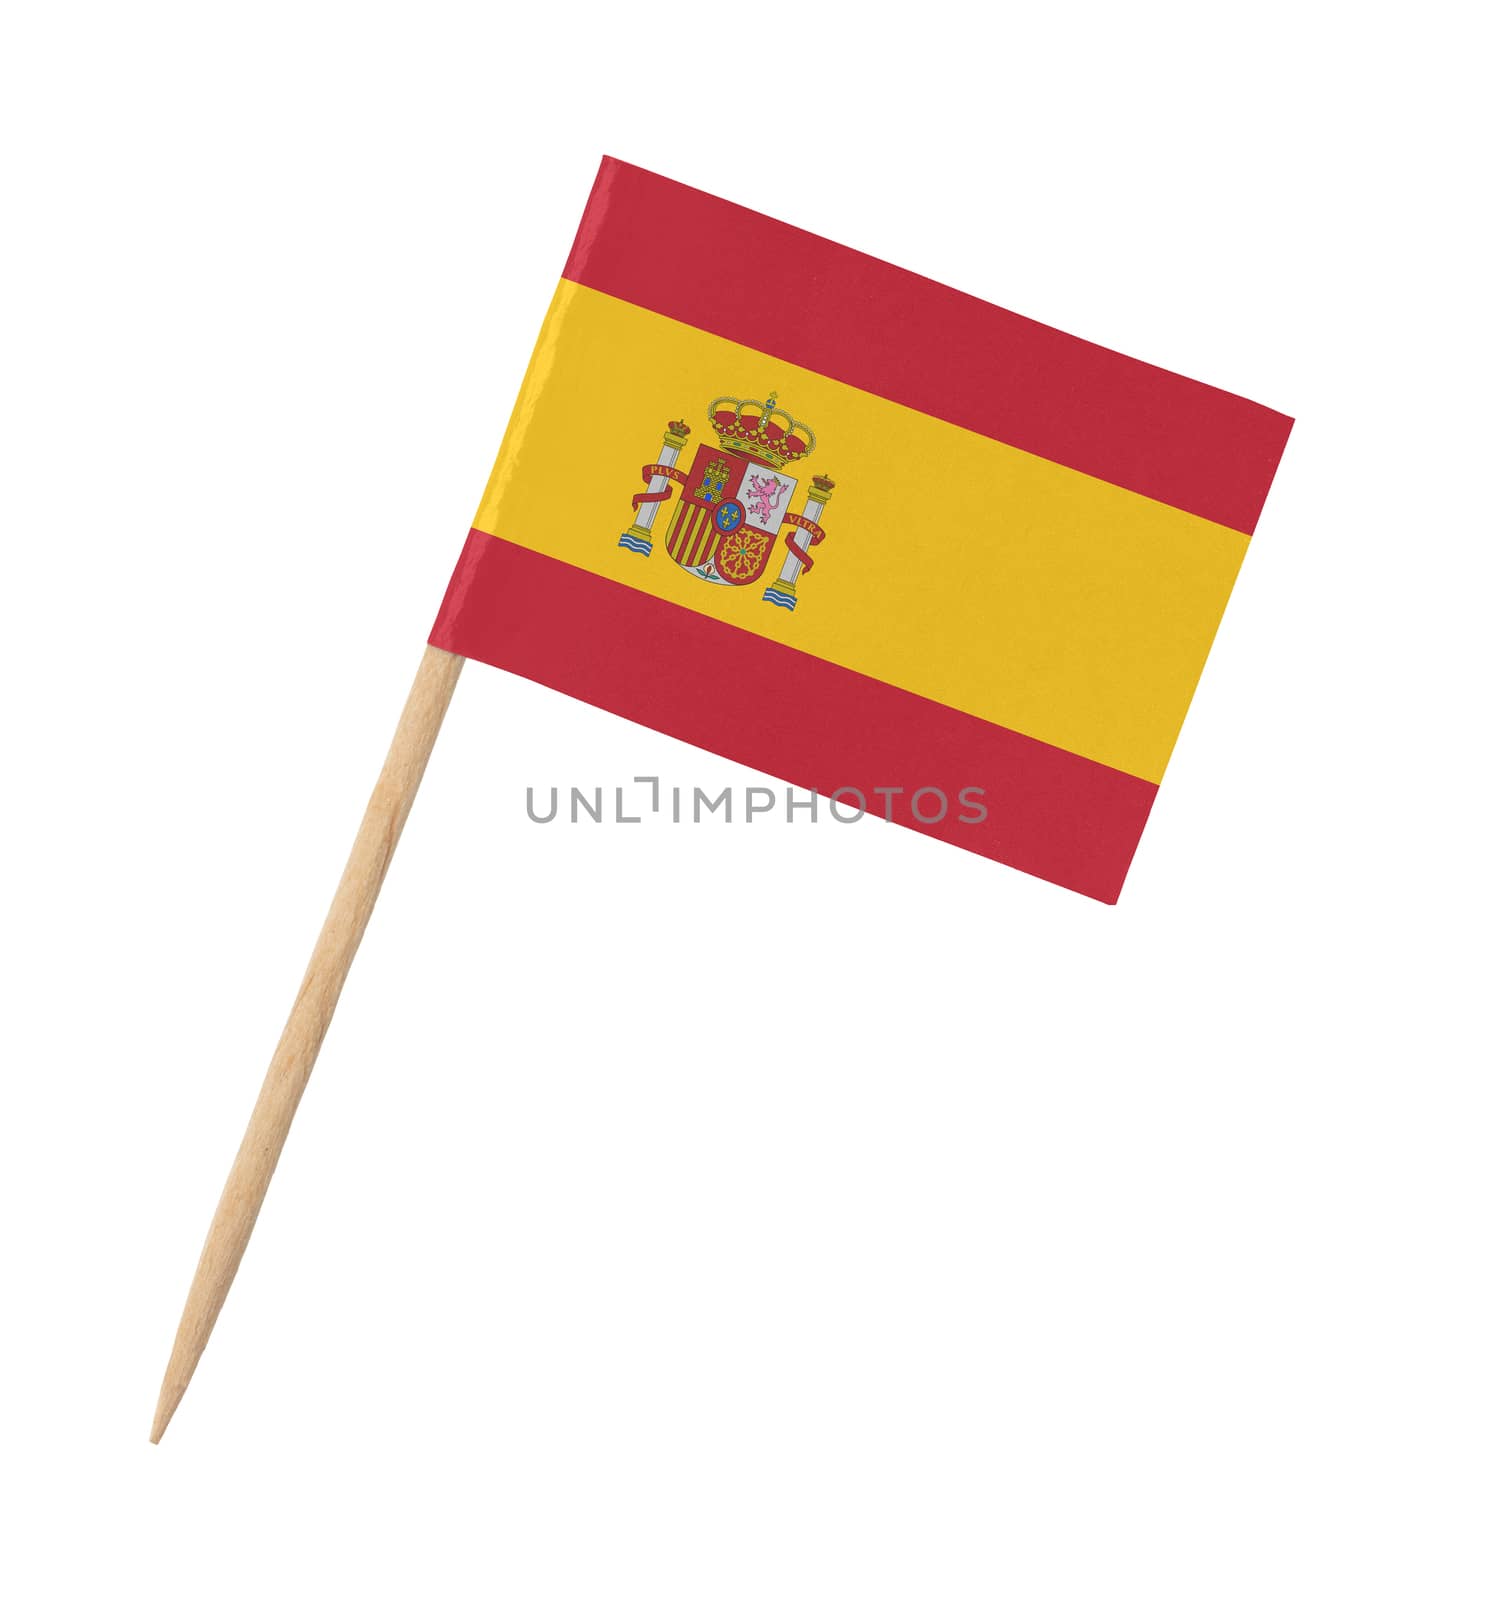 Small paper Spanish flag on wooden stick, isolated on white